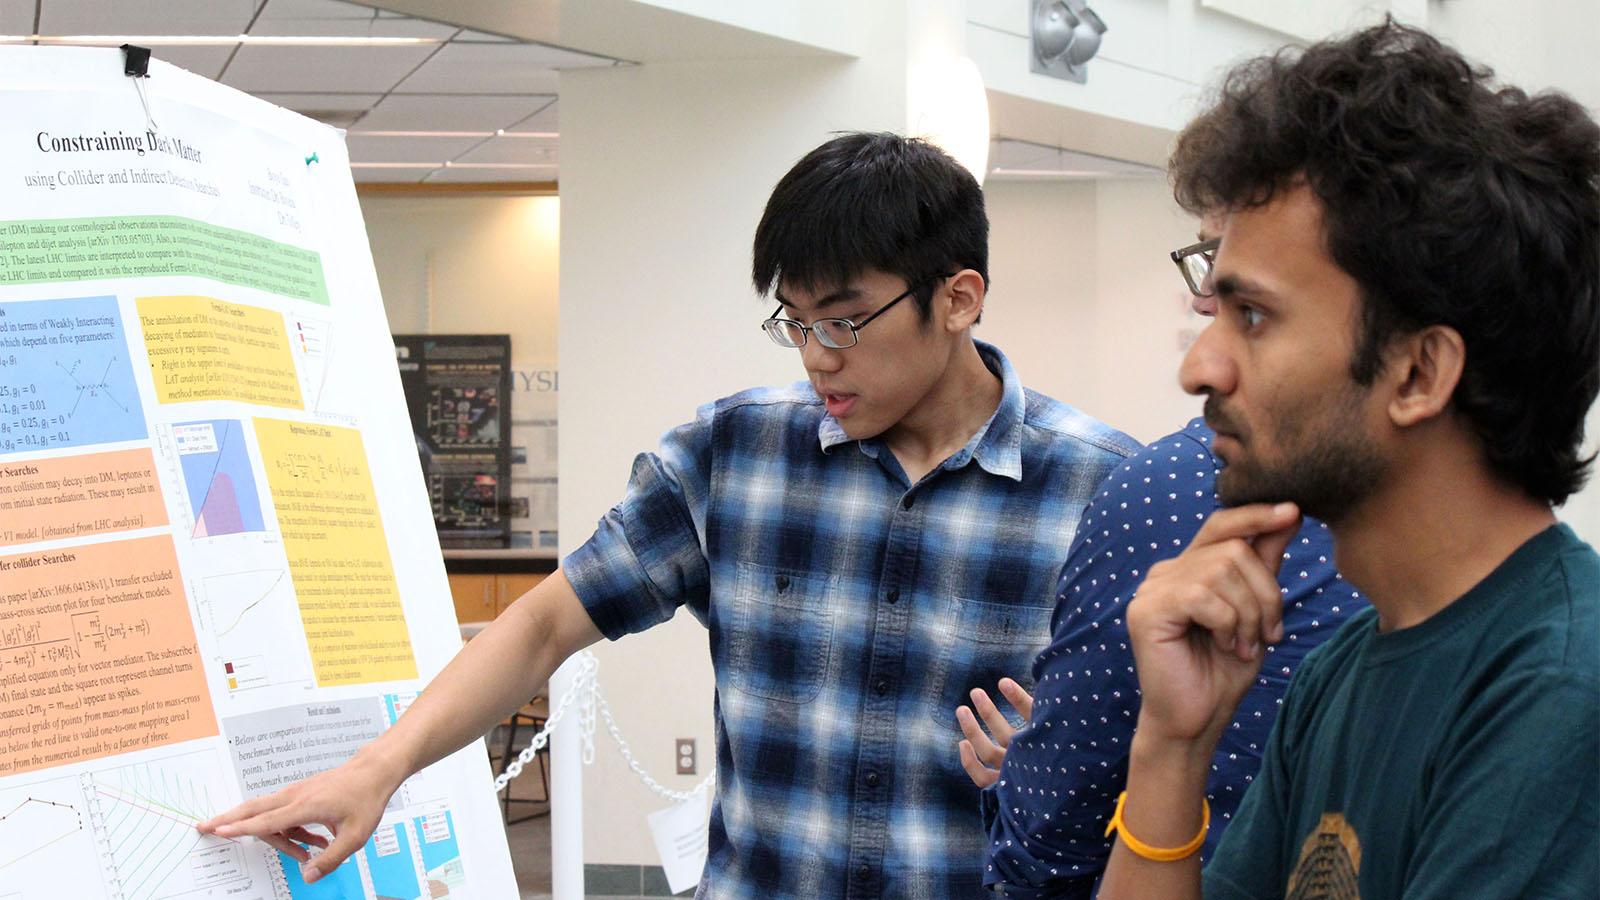 student presenting his research at a poster session